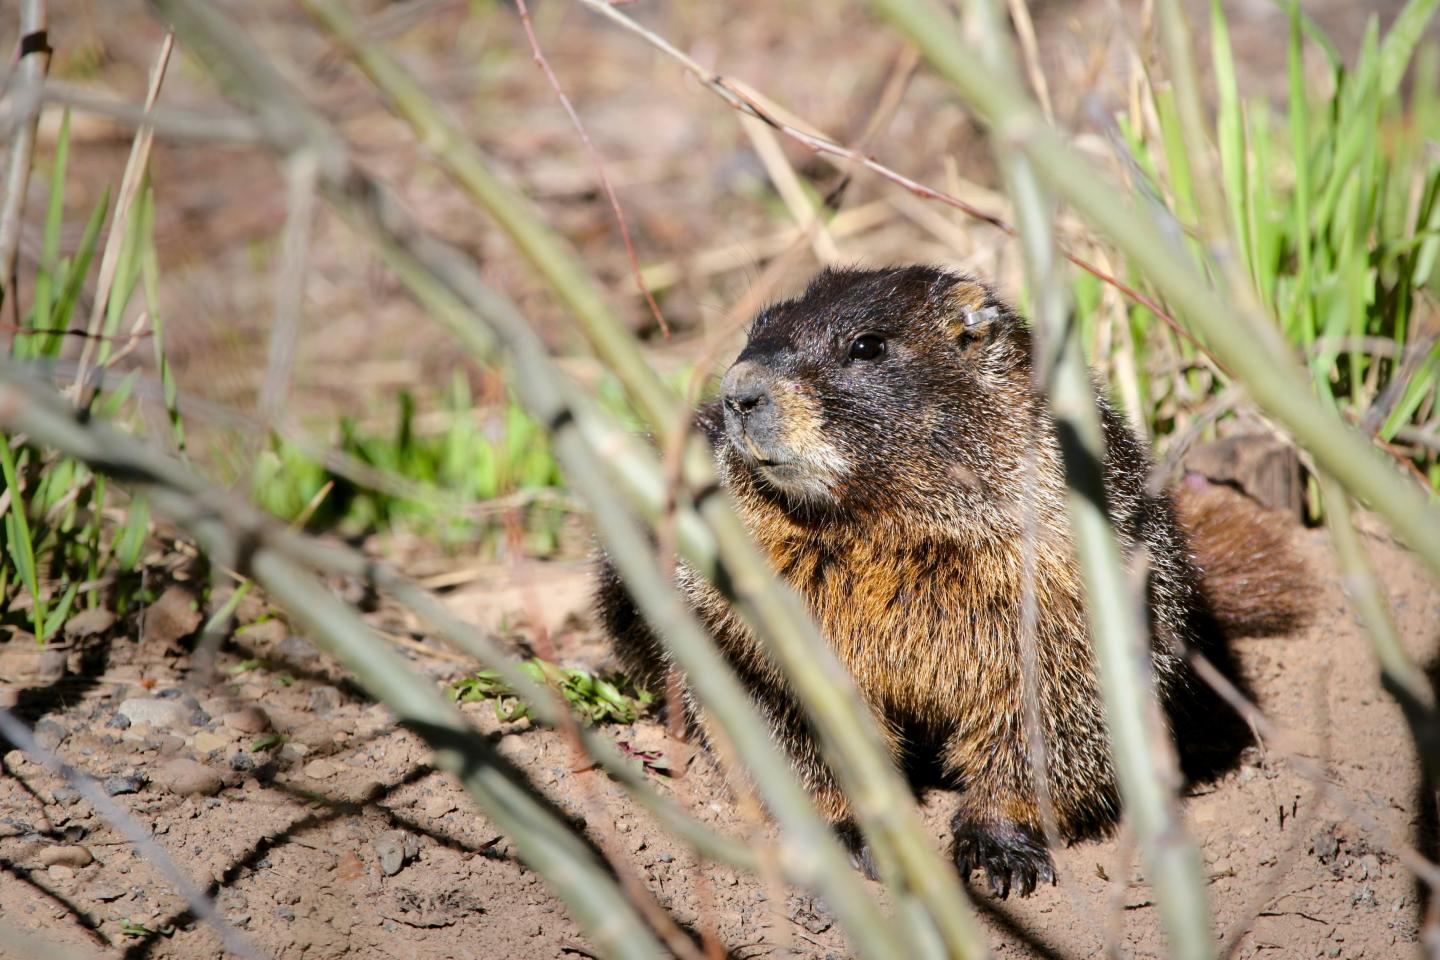 Yellow-Bellied Marmot at the Rocky Mountain Biological Laboratory